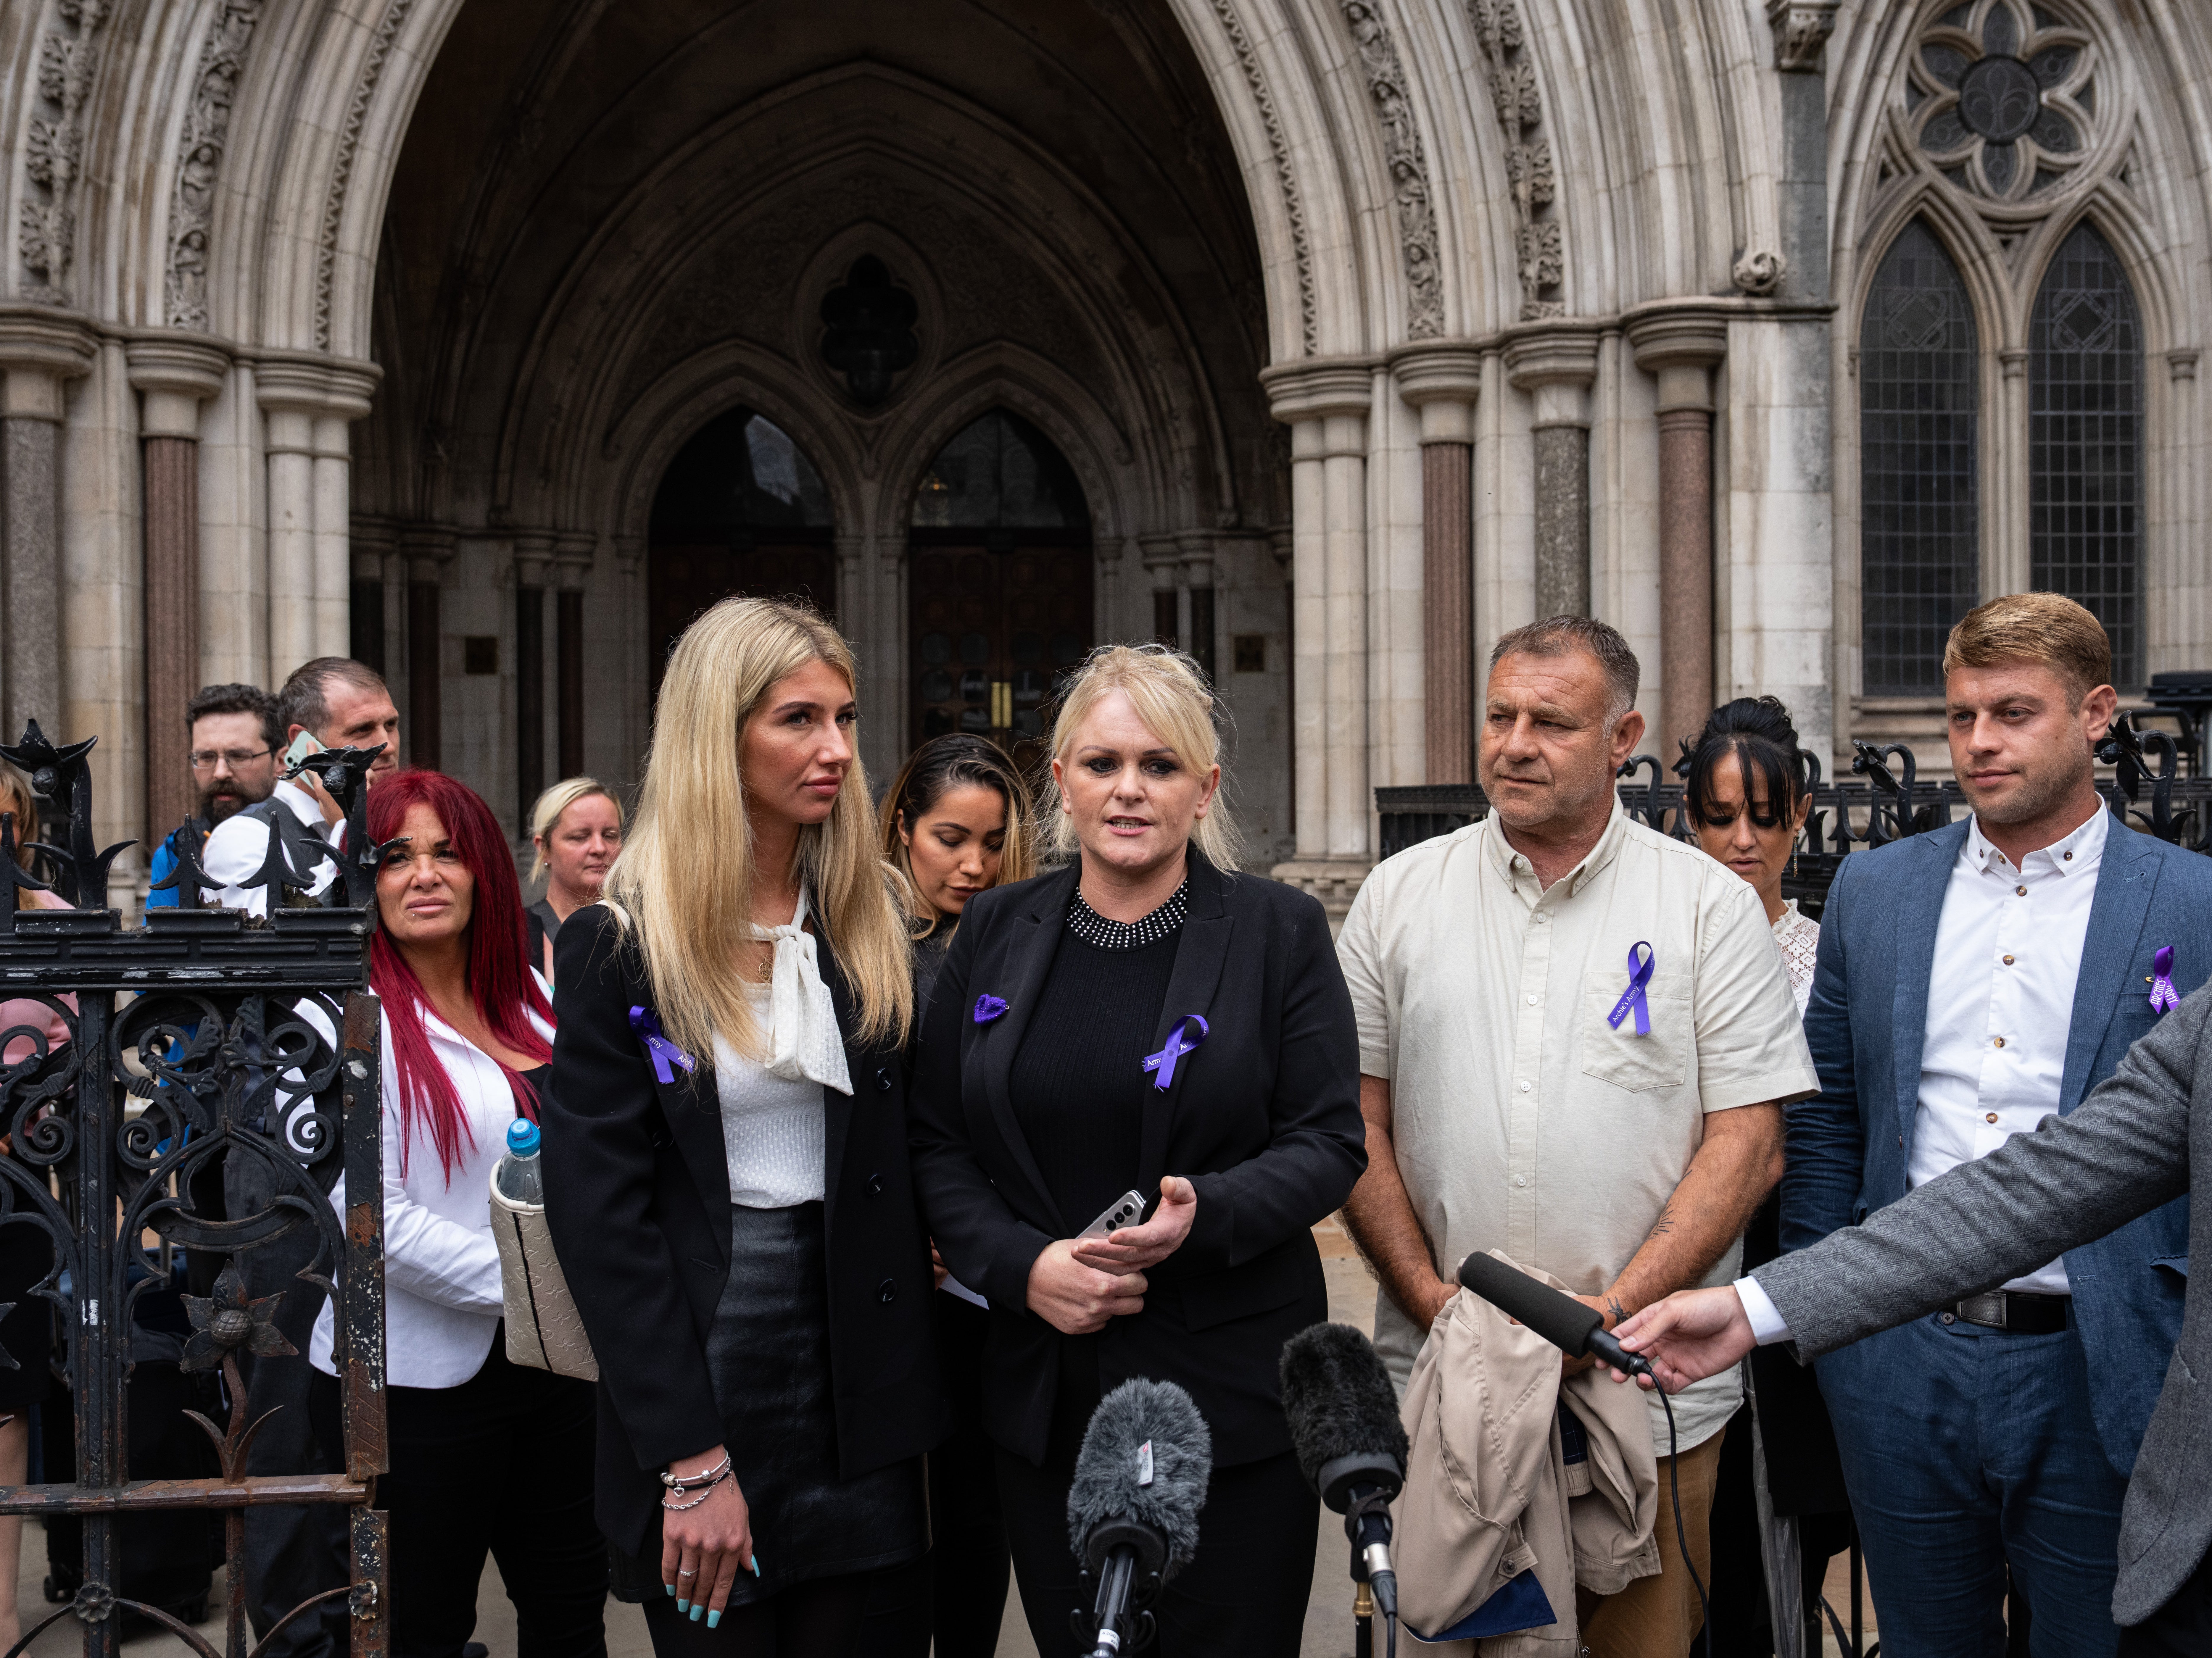 Archie Battersbee’s mother and father, Hollie Dance and Paul Battersbee outside the Royal Courts of Justice